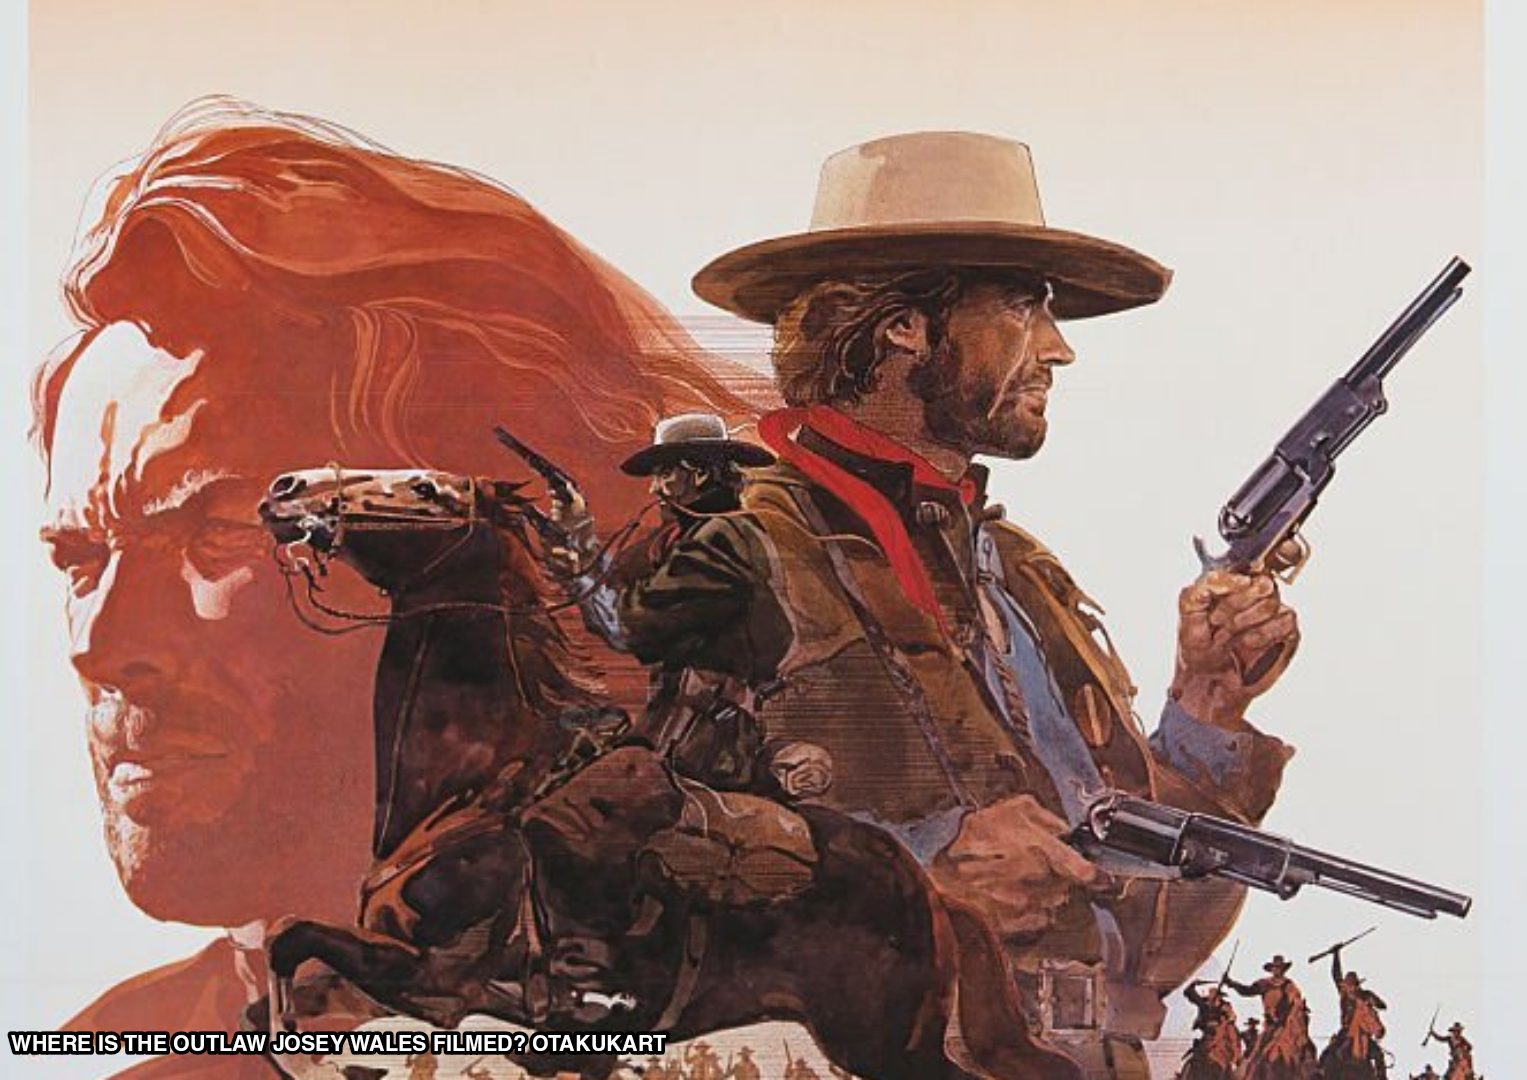 Where Is The Outlaw Josey Wales Filmed?